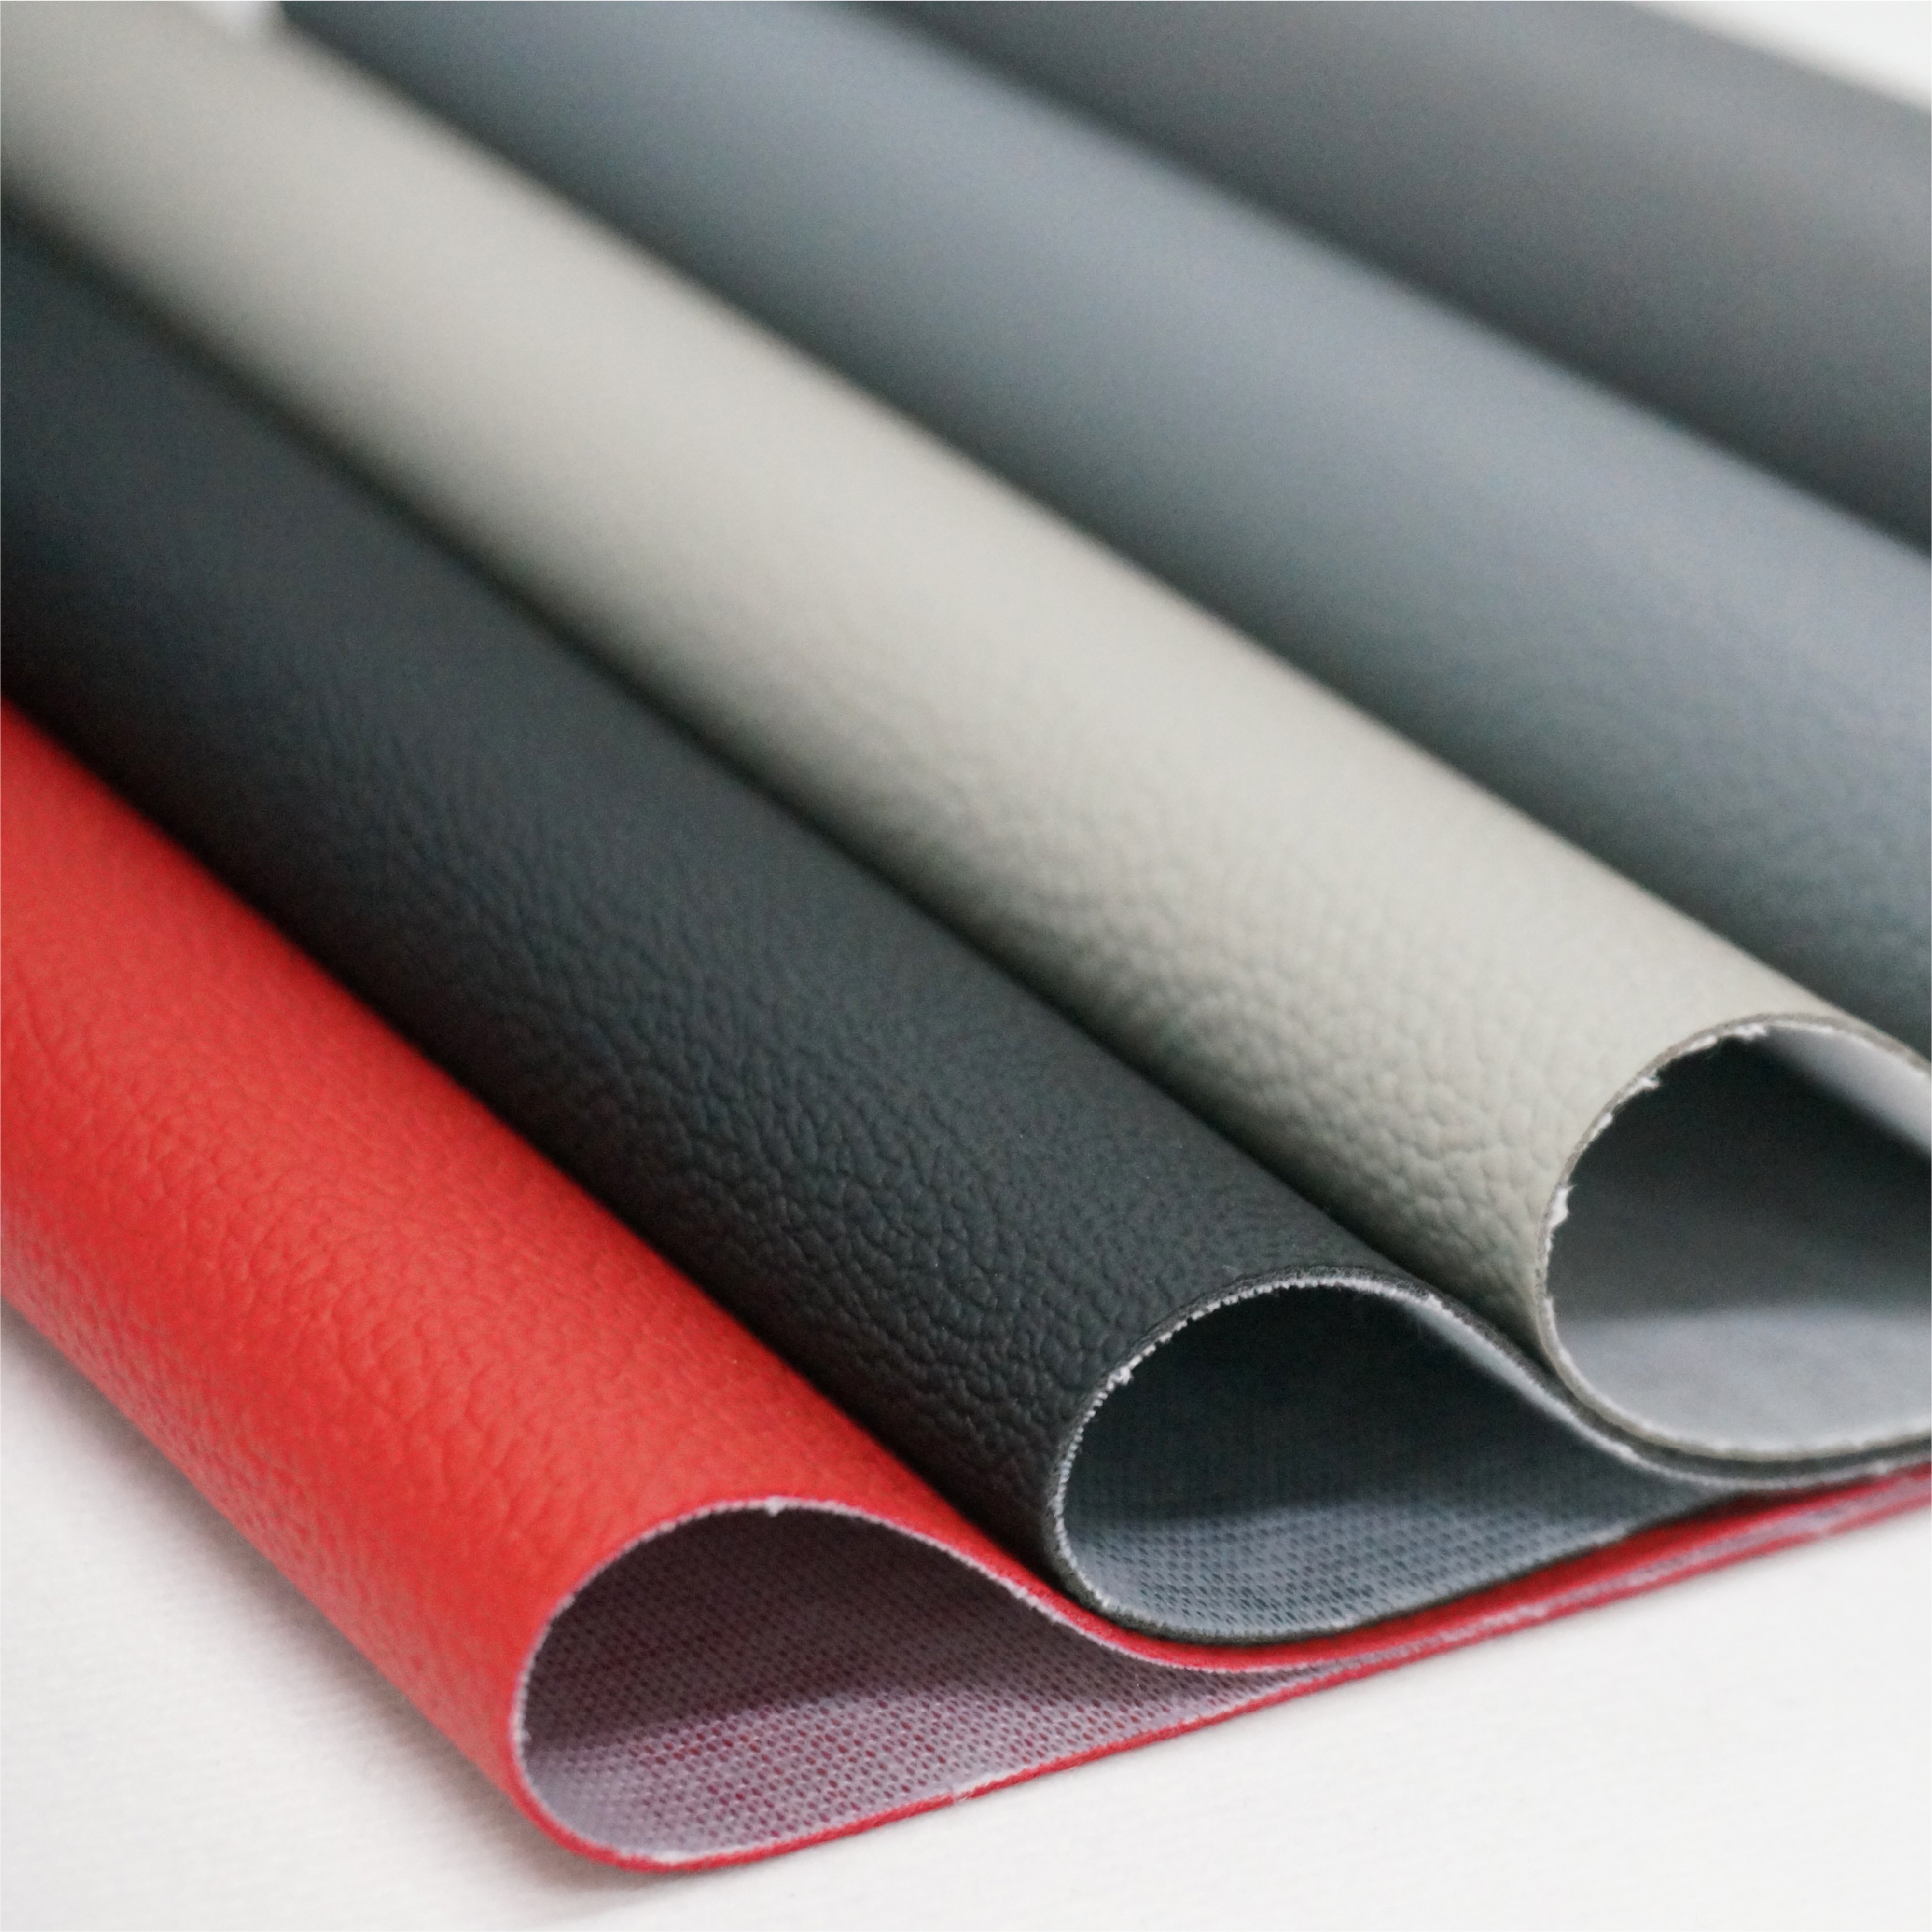 Dongguan pvc leather for sofa upholstery furniture supplier